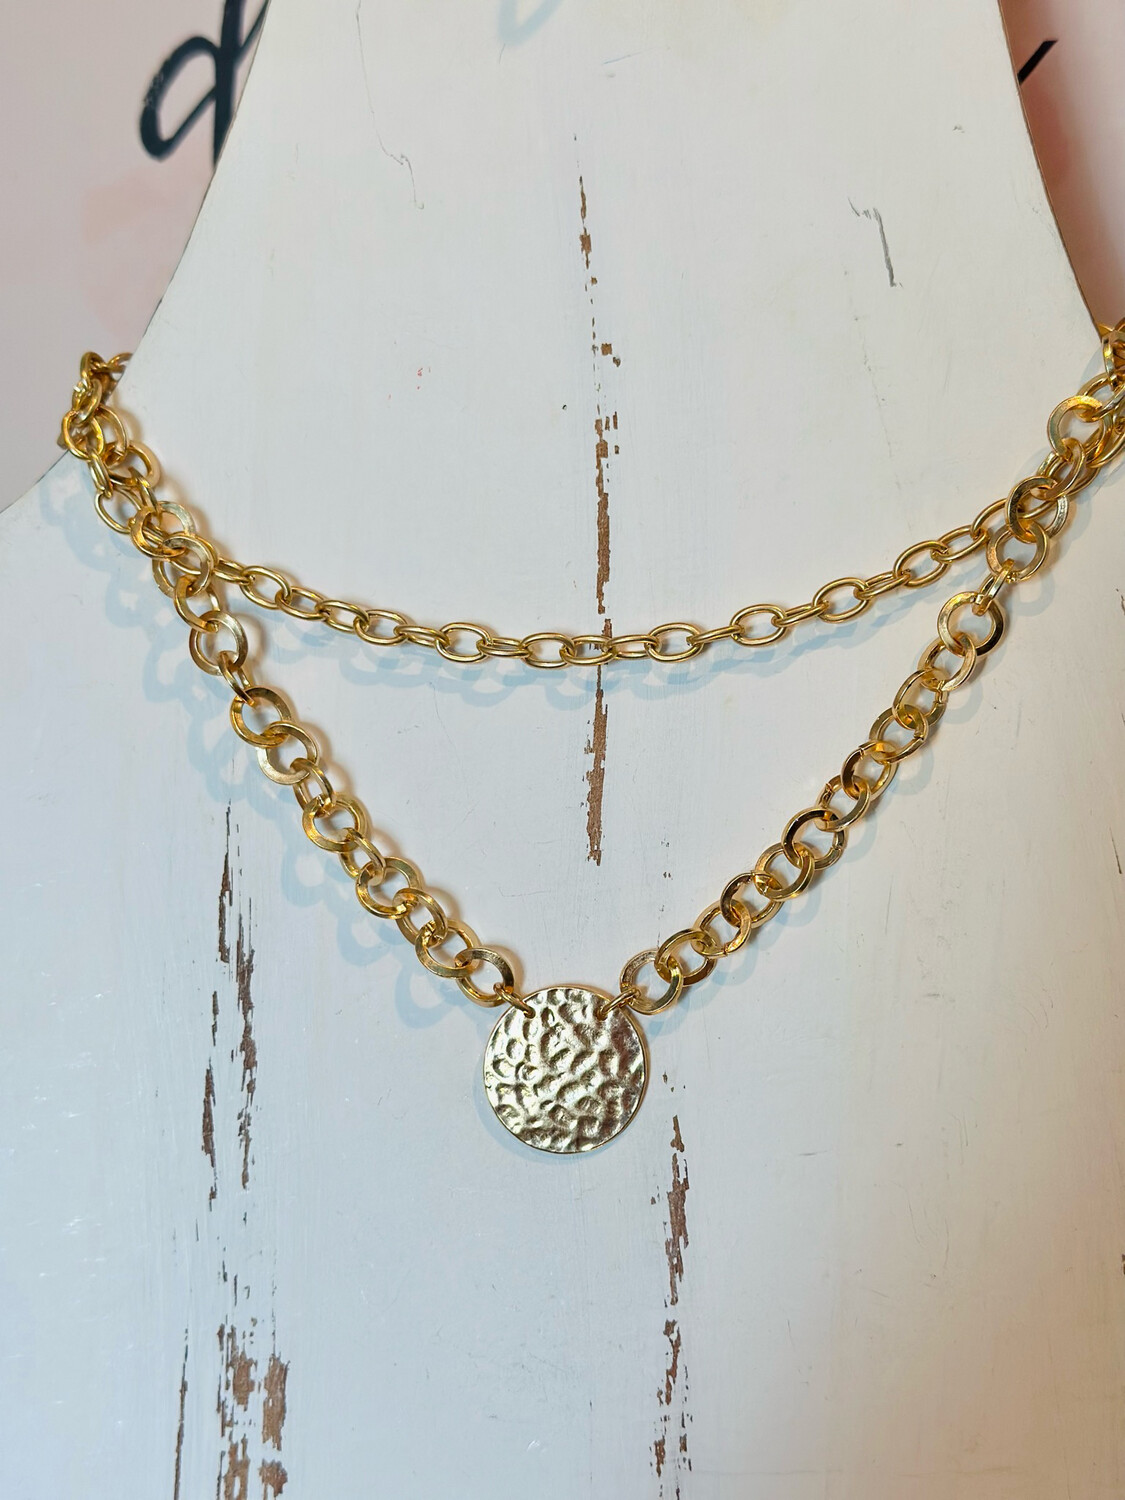 Worn Gold Charm Necklace 